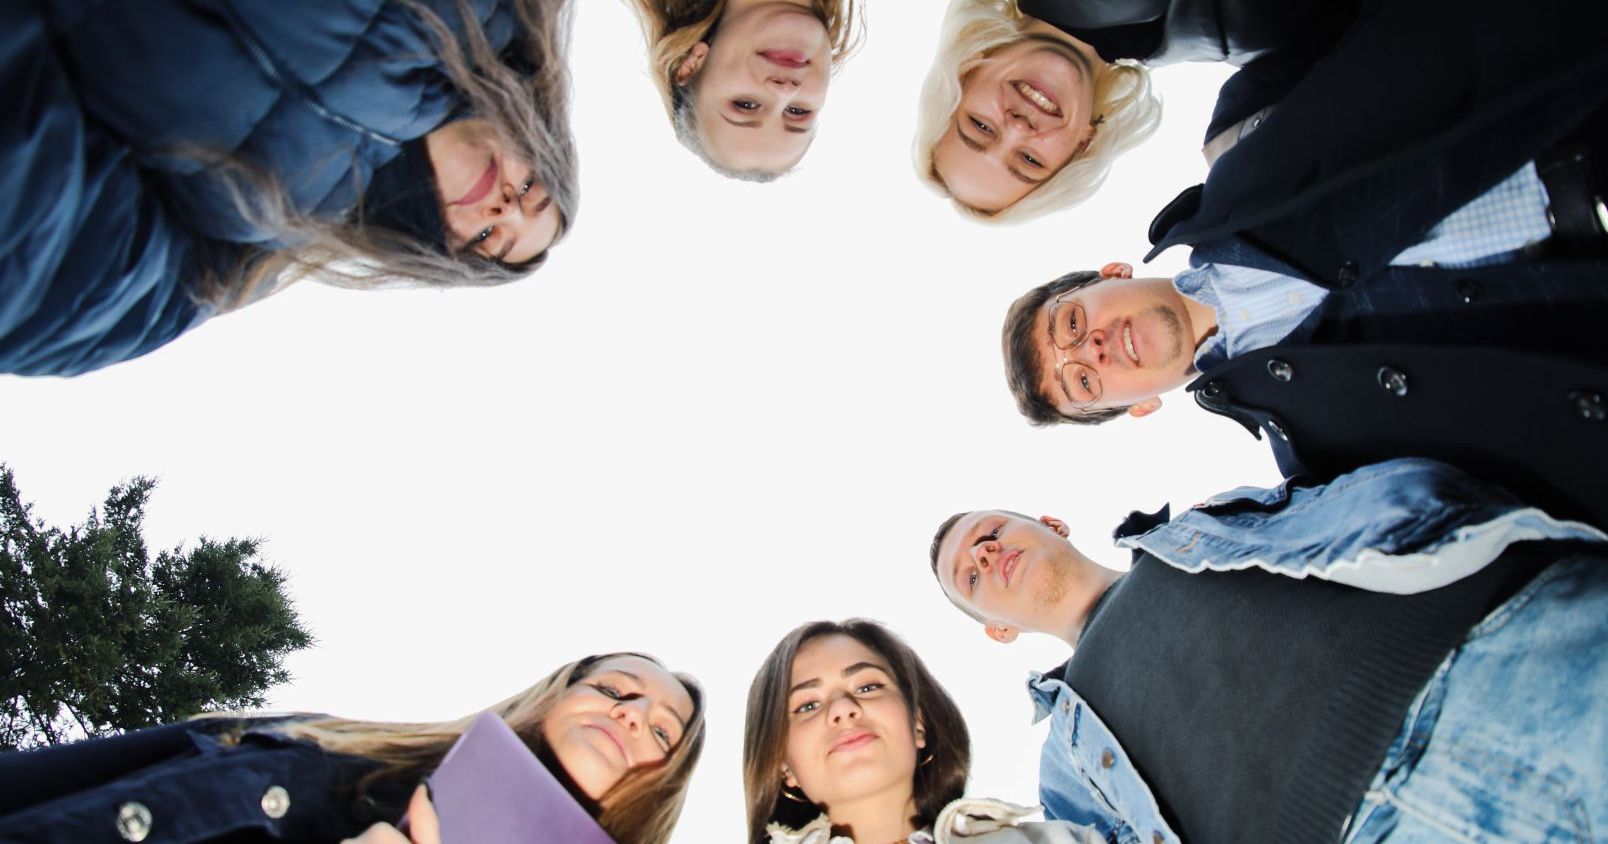  A group of students standing in circle, photo was taken from below